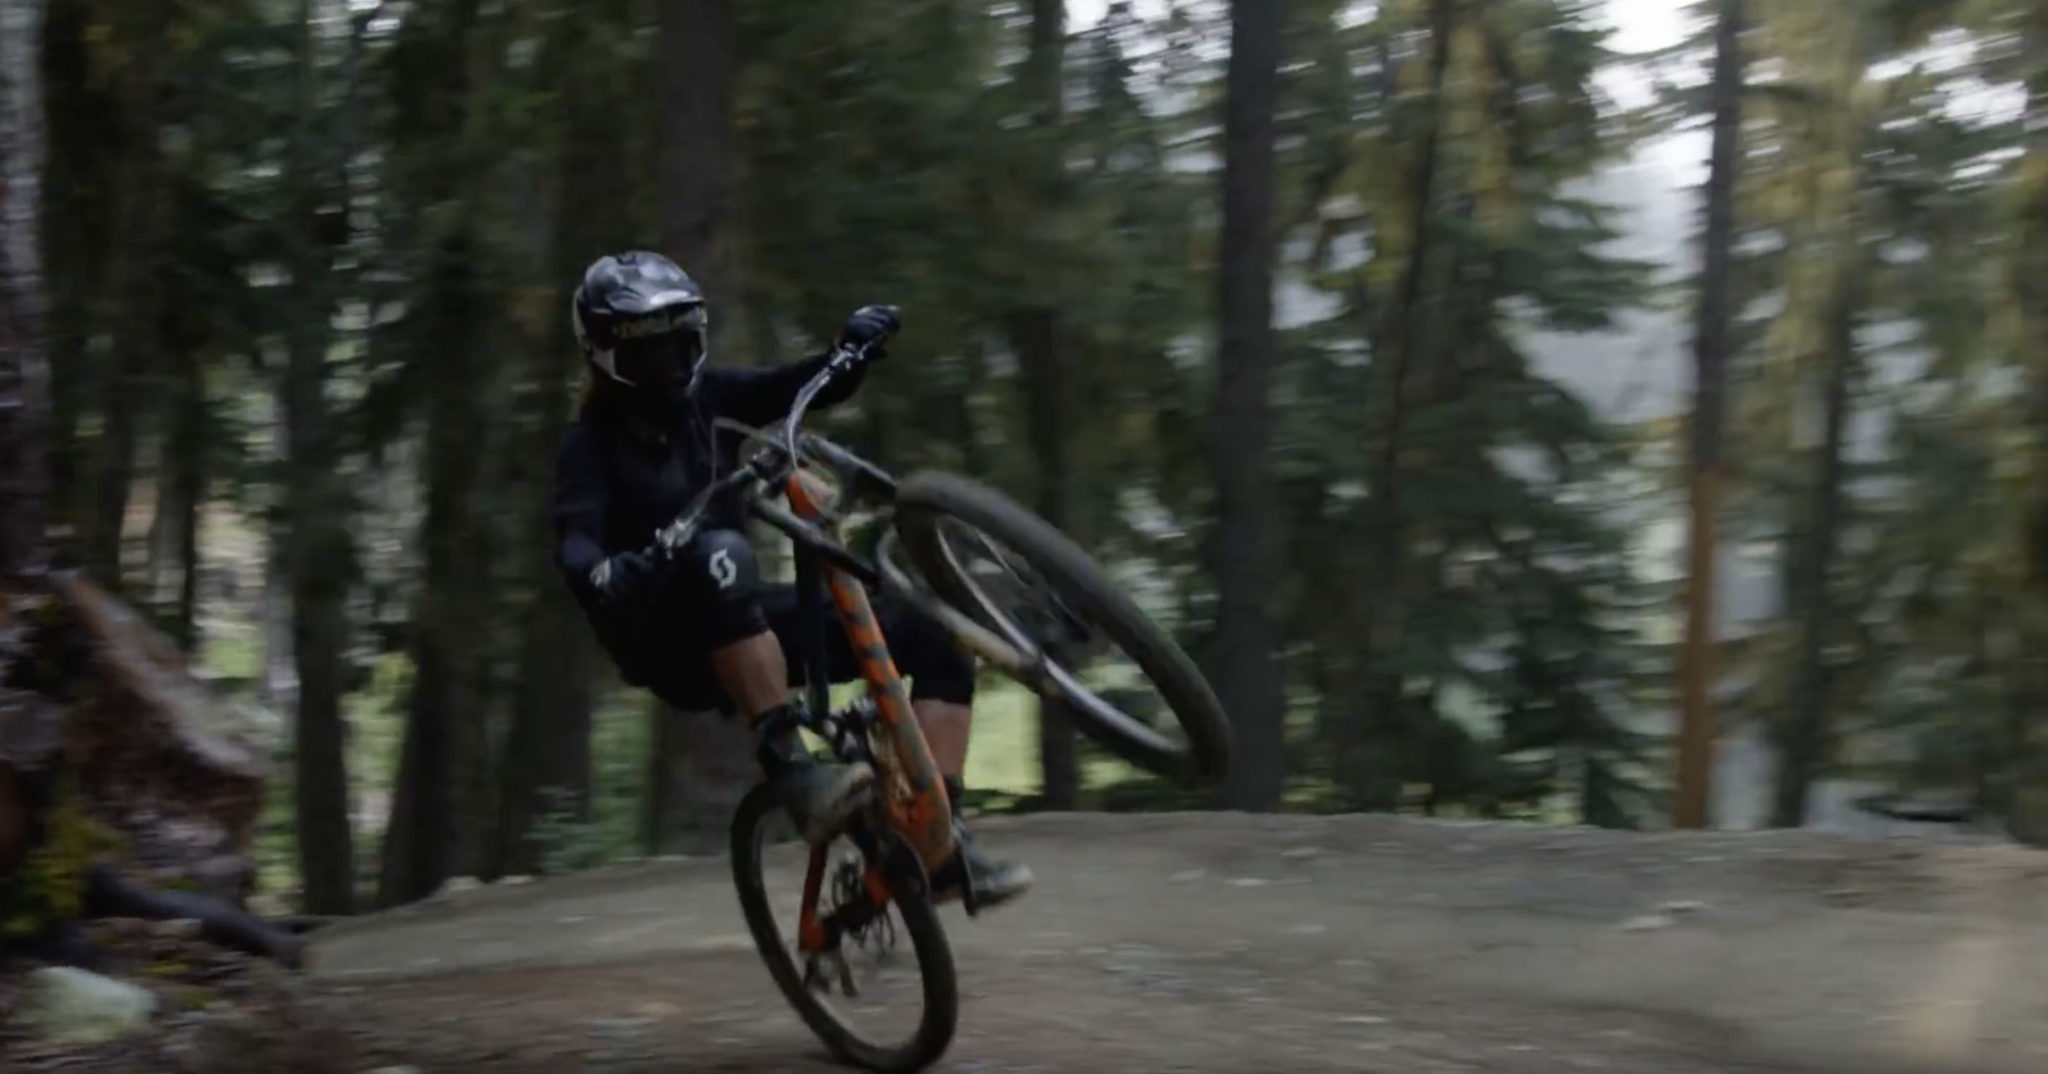 All-time manual down the Whistler bike park with Nico Vink!